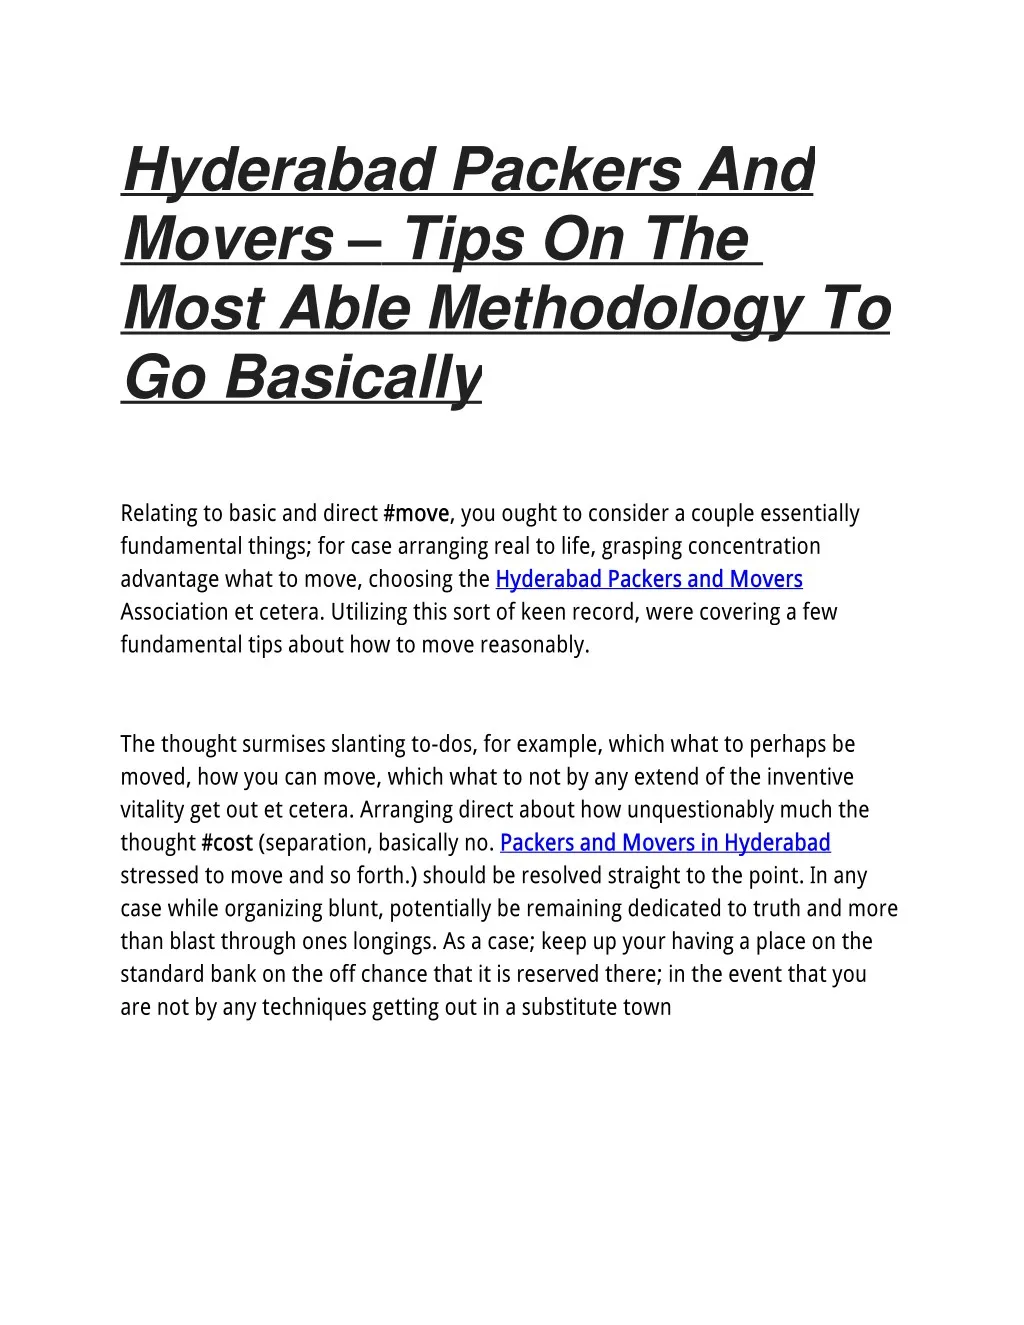 hyderabad packers and movers tips on the most